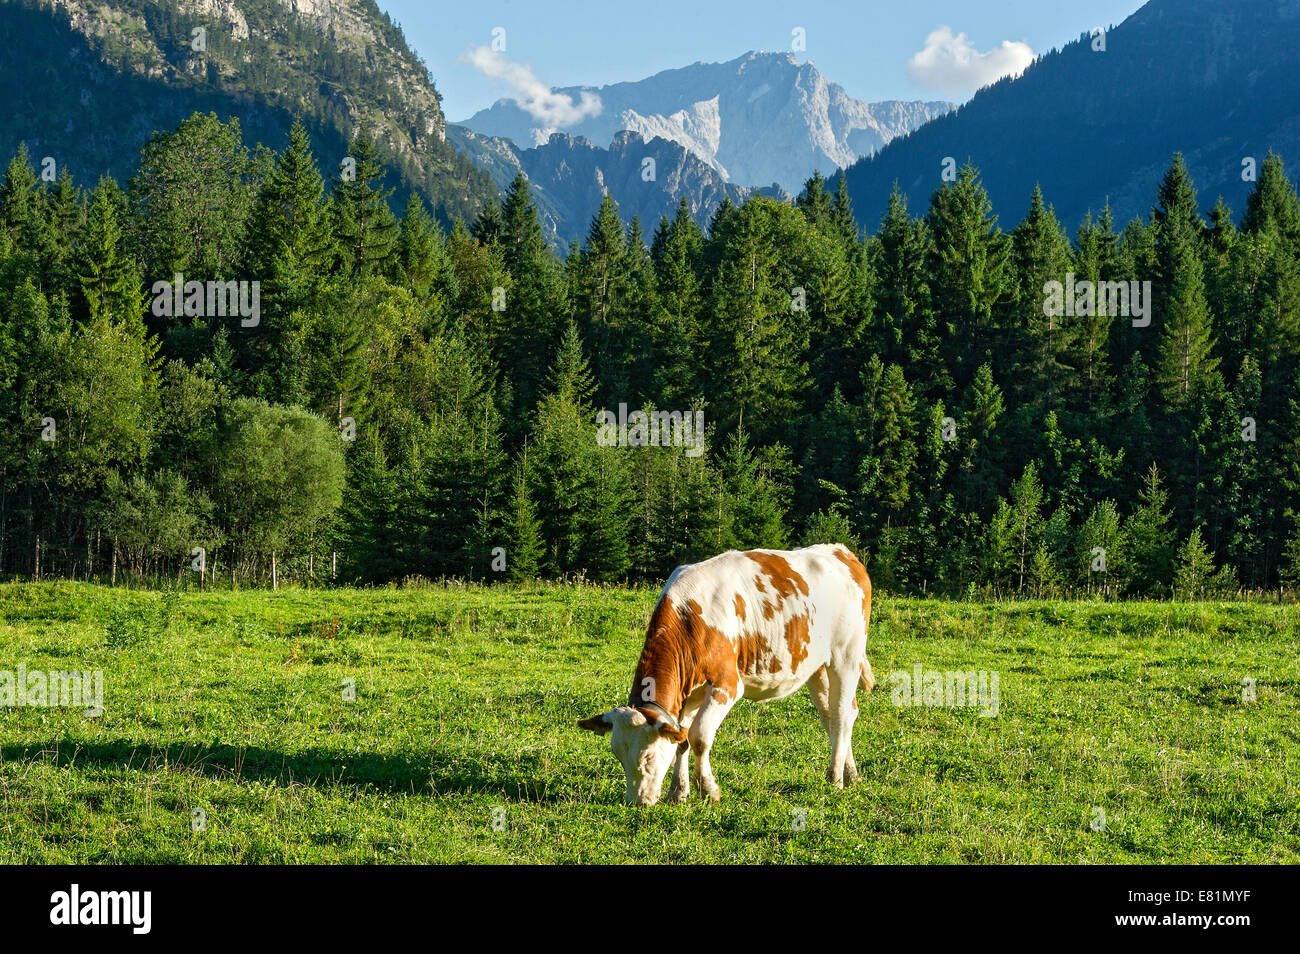 Cow on the pasture, Ettaler Forst, Wetterstein Mountains with Zugspitze Mountain, Upper Bavaria, Bavaria, Germany Stock Photo